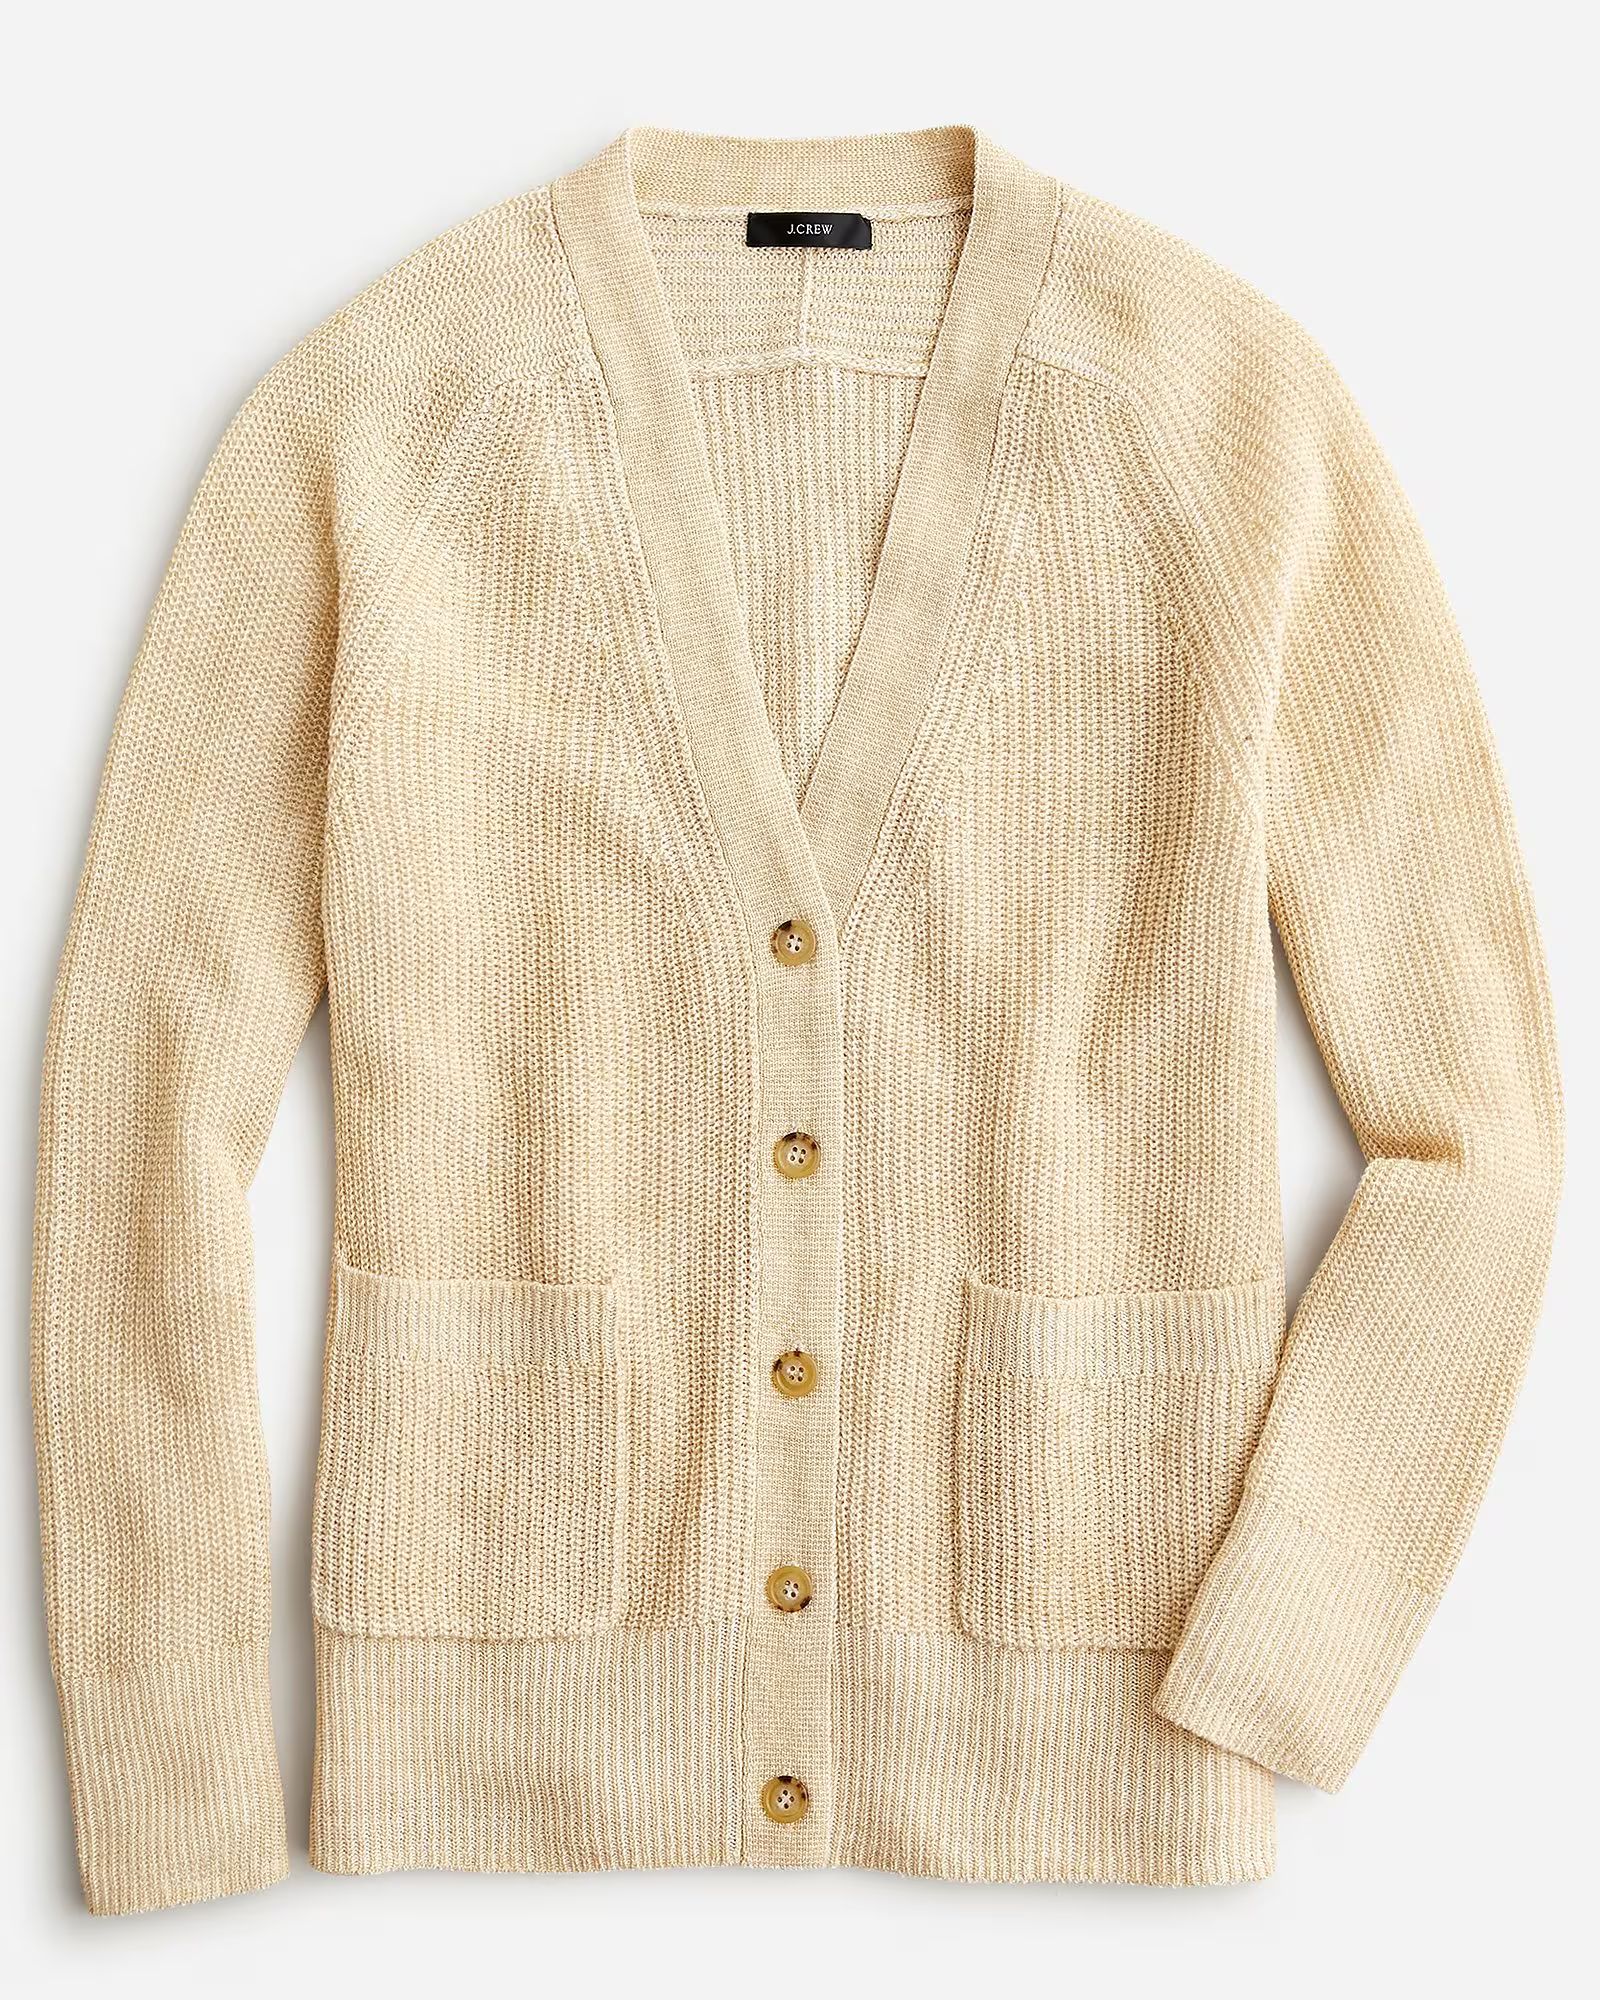 Relaxed cotton-linen blend cardigan sweater | J.Crew US